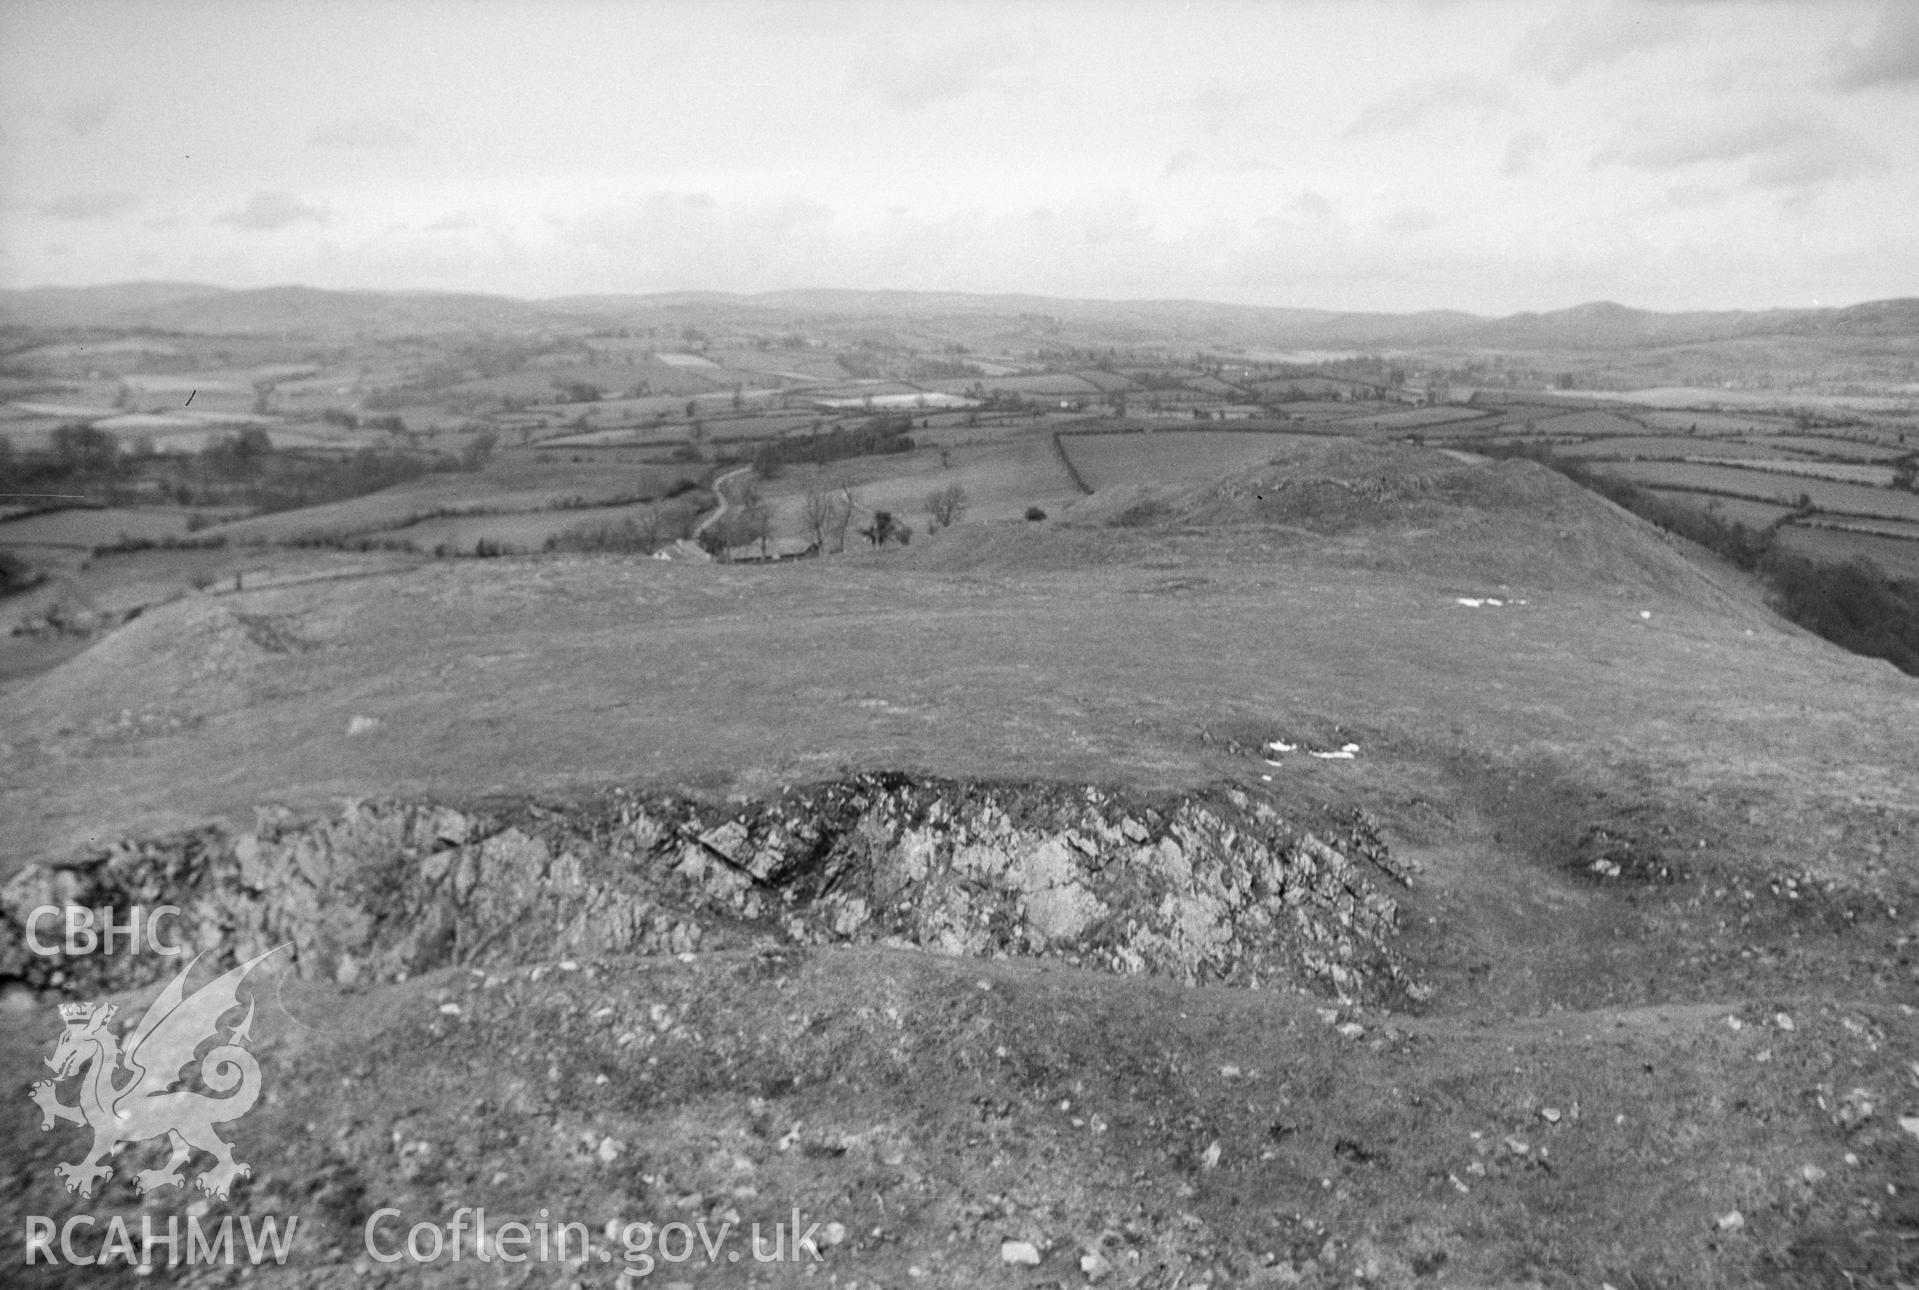 Digital copy of a nitrate negative showing Cefnllys Castle.